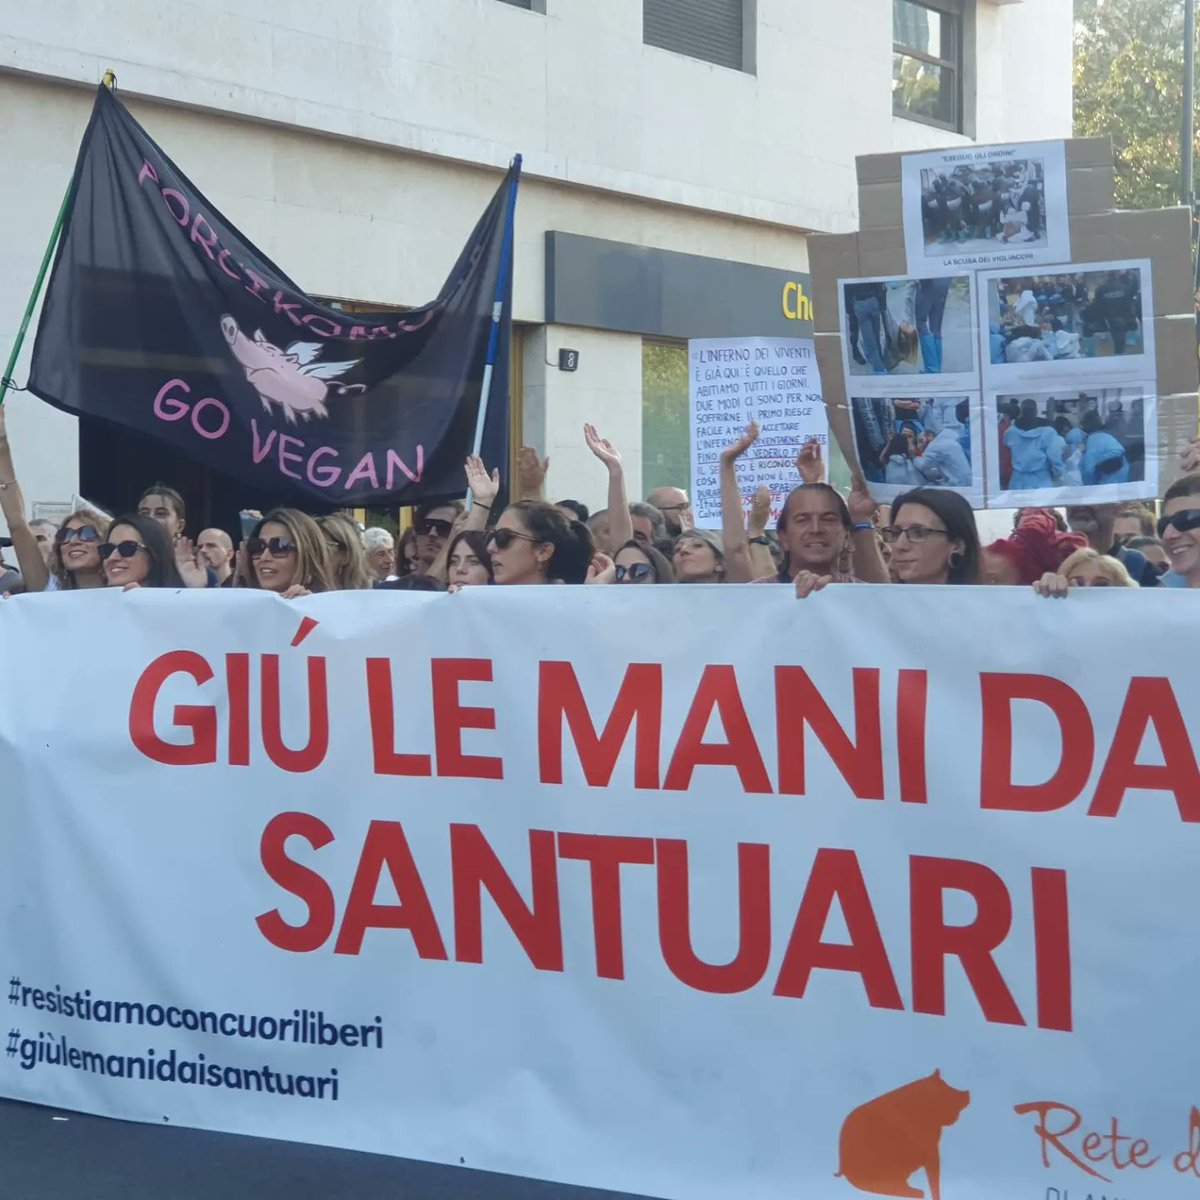 We were over 10 thousands souls out on the streets of Milan to ask for a #foodsystem that respects animals, people & planet. 
#vegan  #govegan #noplanetb #eatingourwaytoextinction 
#giulemanidaisantuari 
#cuoriliberi #siamotutticuoriliberi
#untileverycageisempty #FriendsNotFood